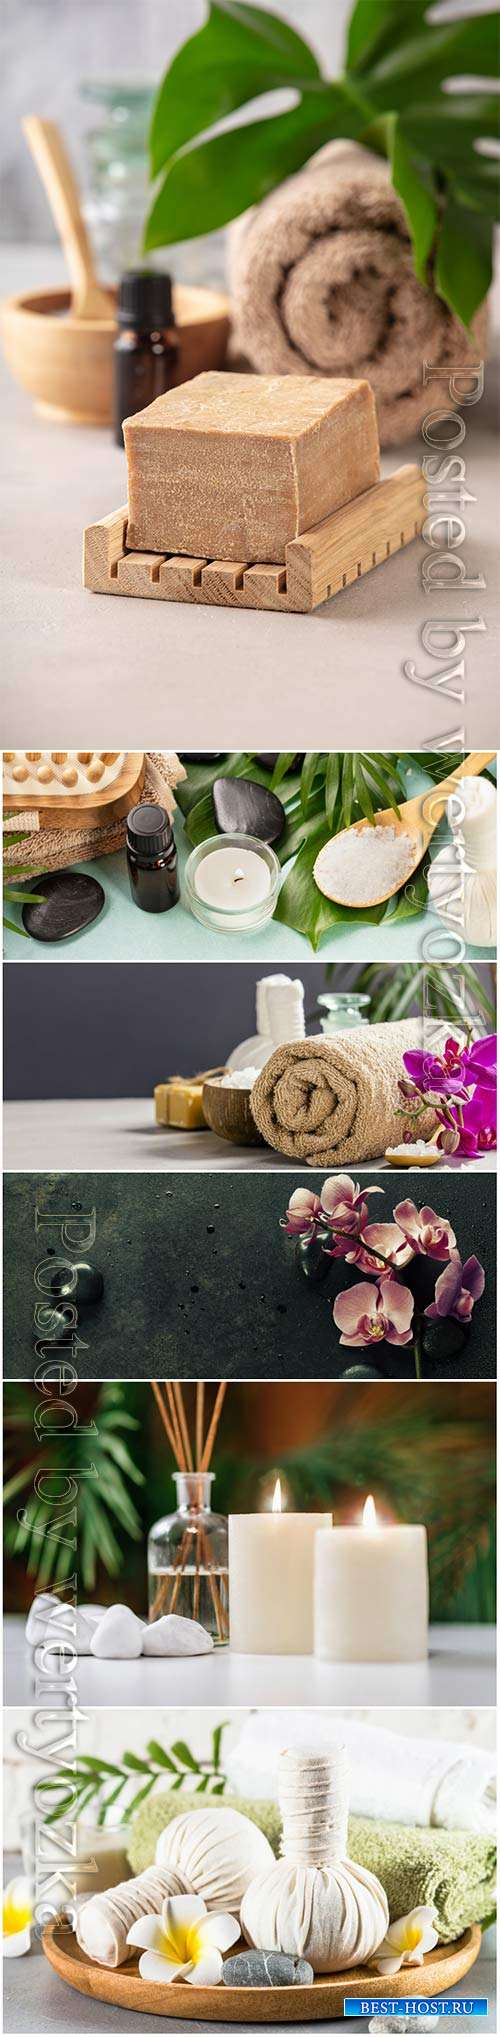 Spa and relaxation concept